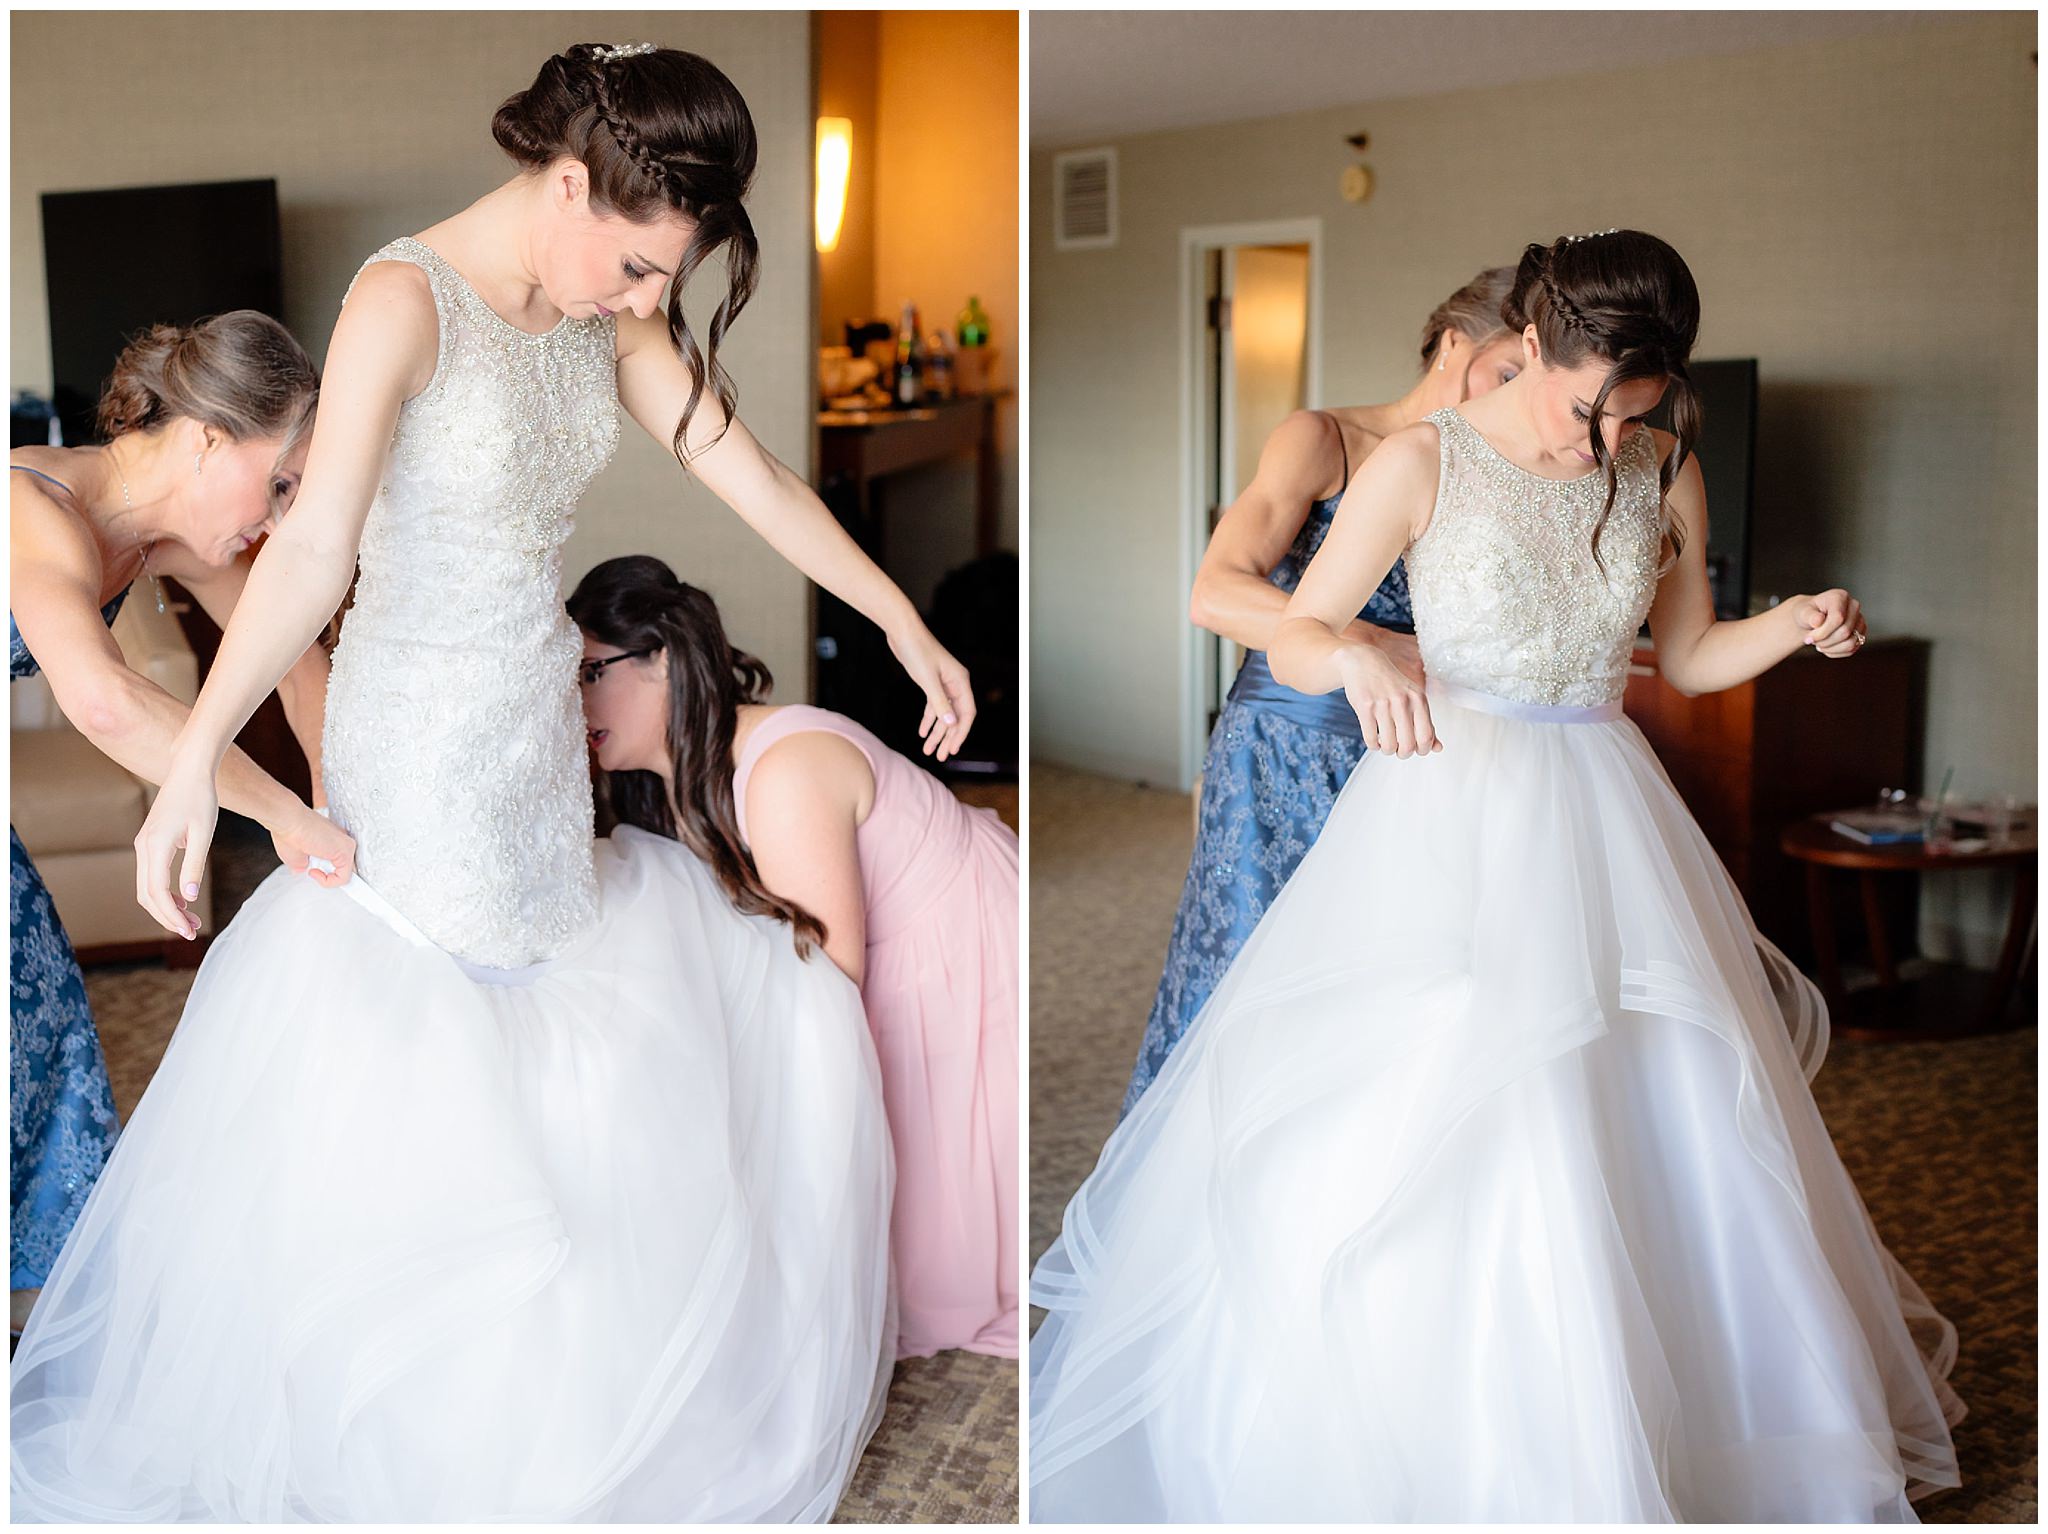 Mother of the bride helps put the tulle skirt over bride's Allure wedding dress